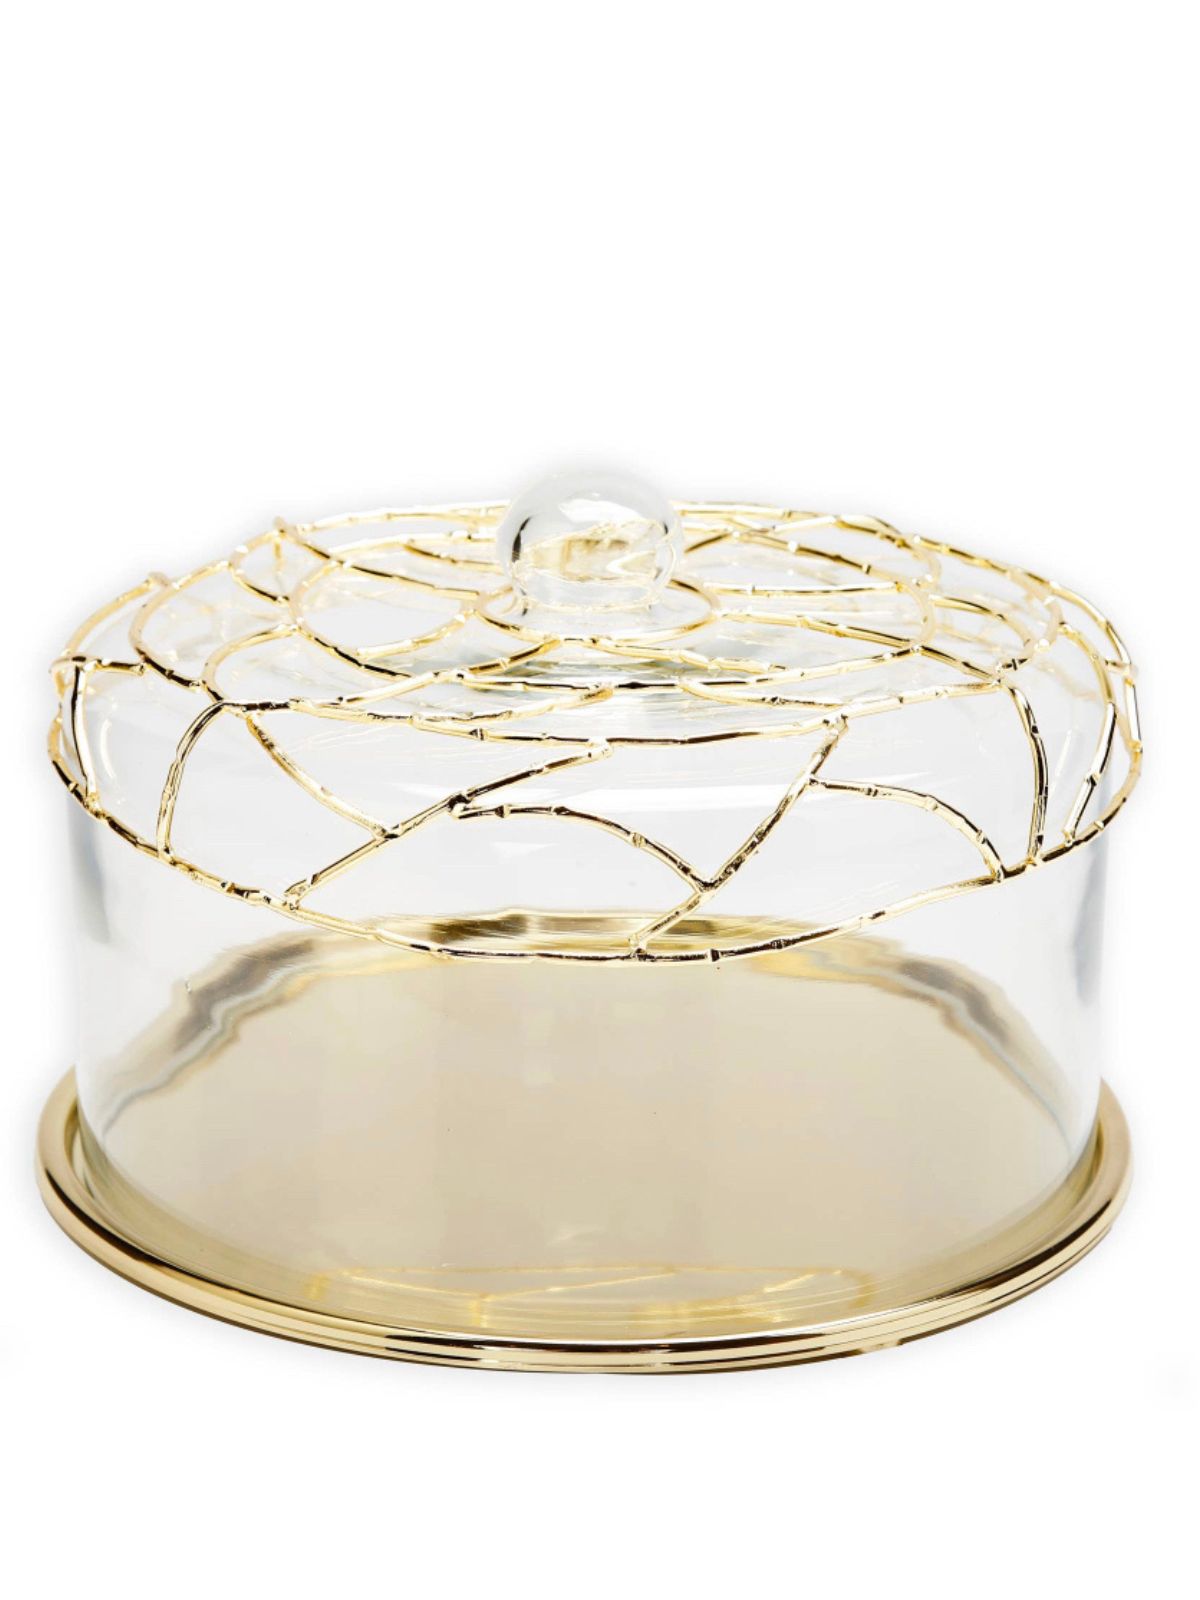 11.25D Gold Metal Cake Plate with Glass Dome and Gold Mesh Design sold by KYA Home Decor.